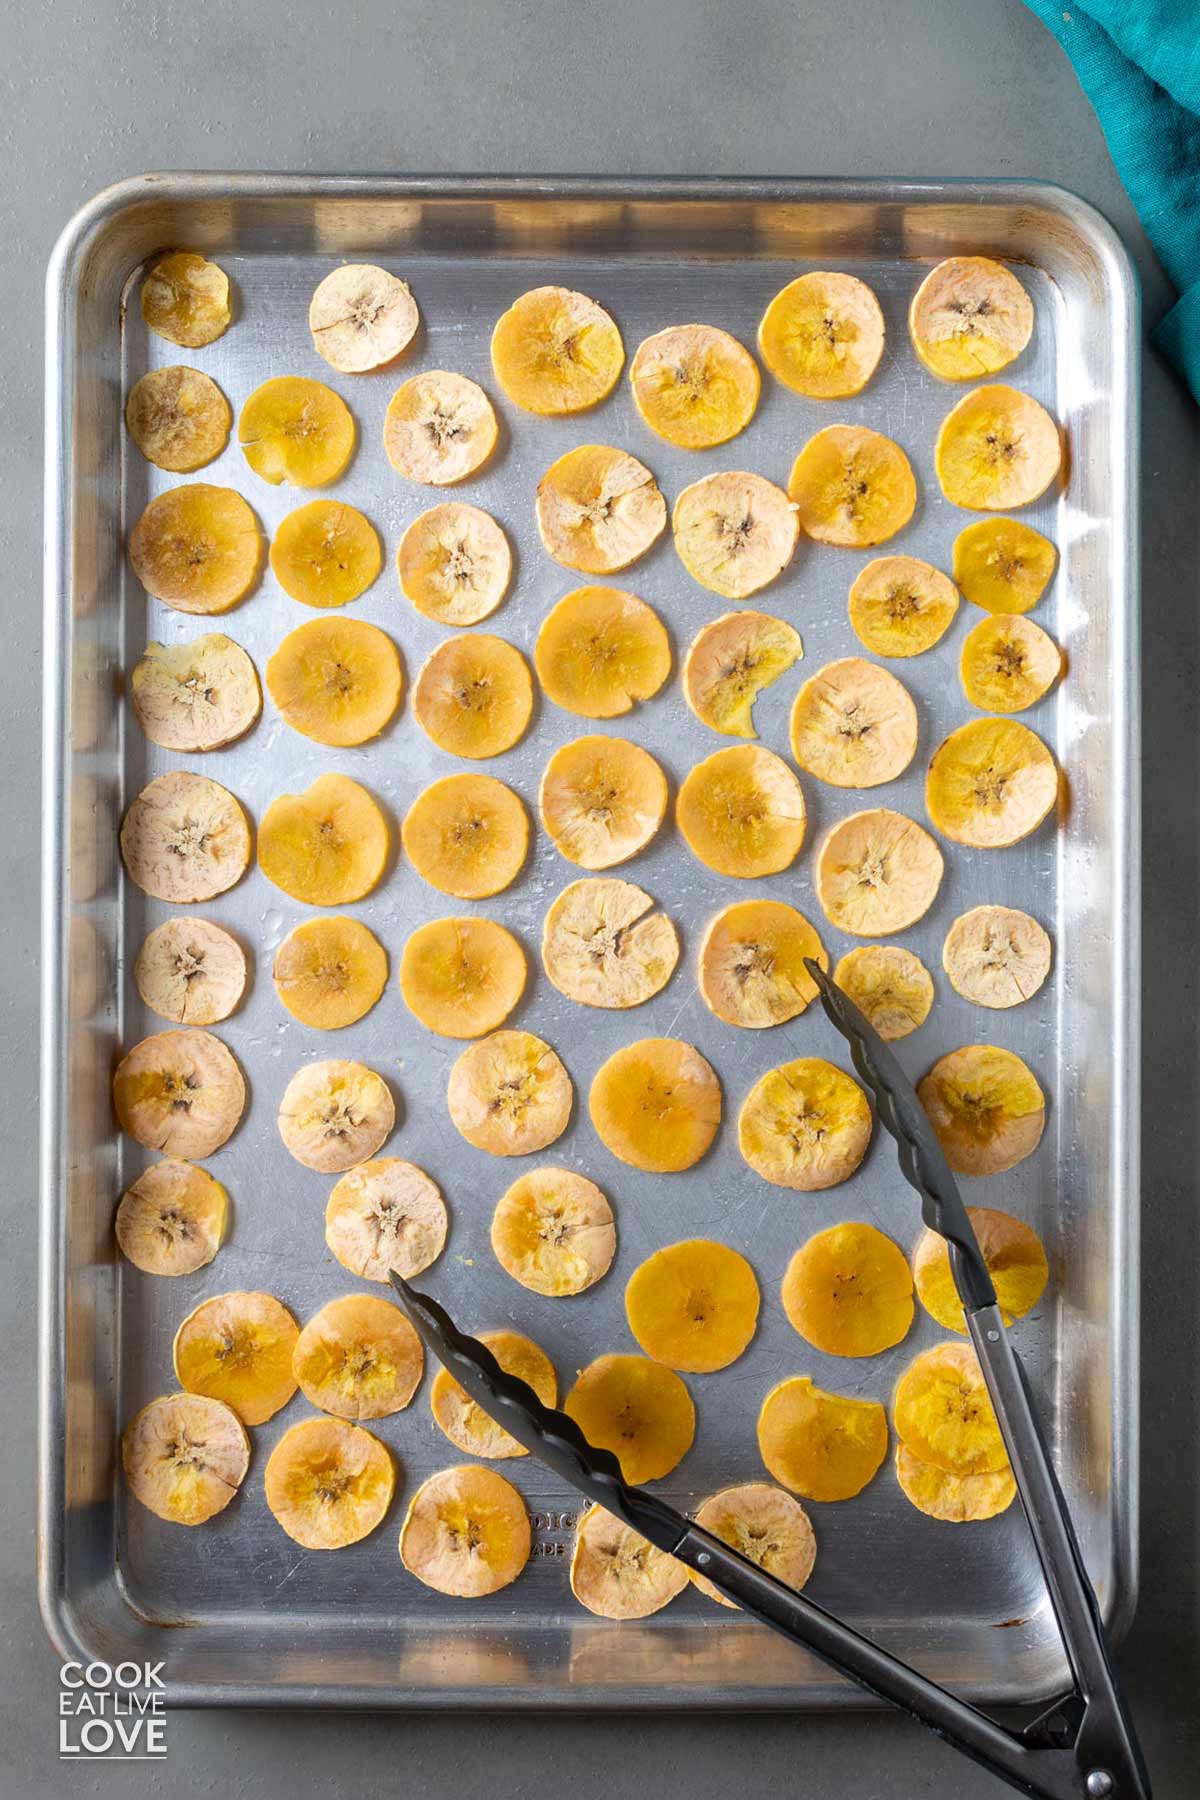 Baking tray of plantain slices after cooking and flipping.